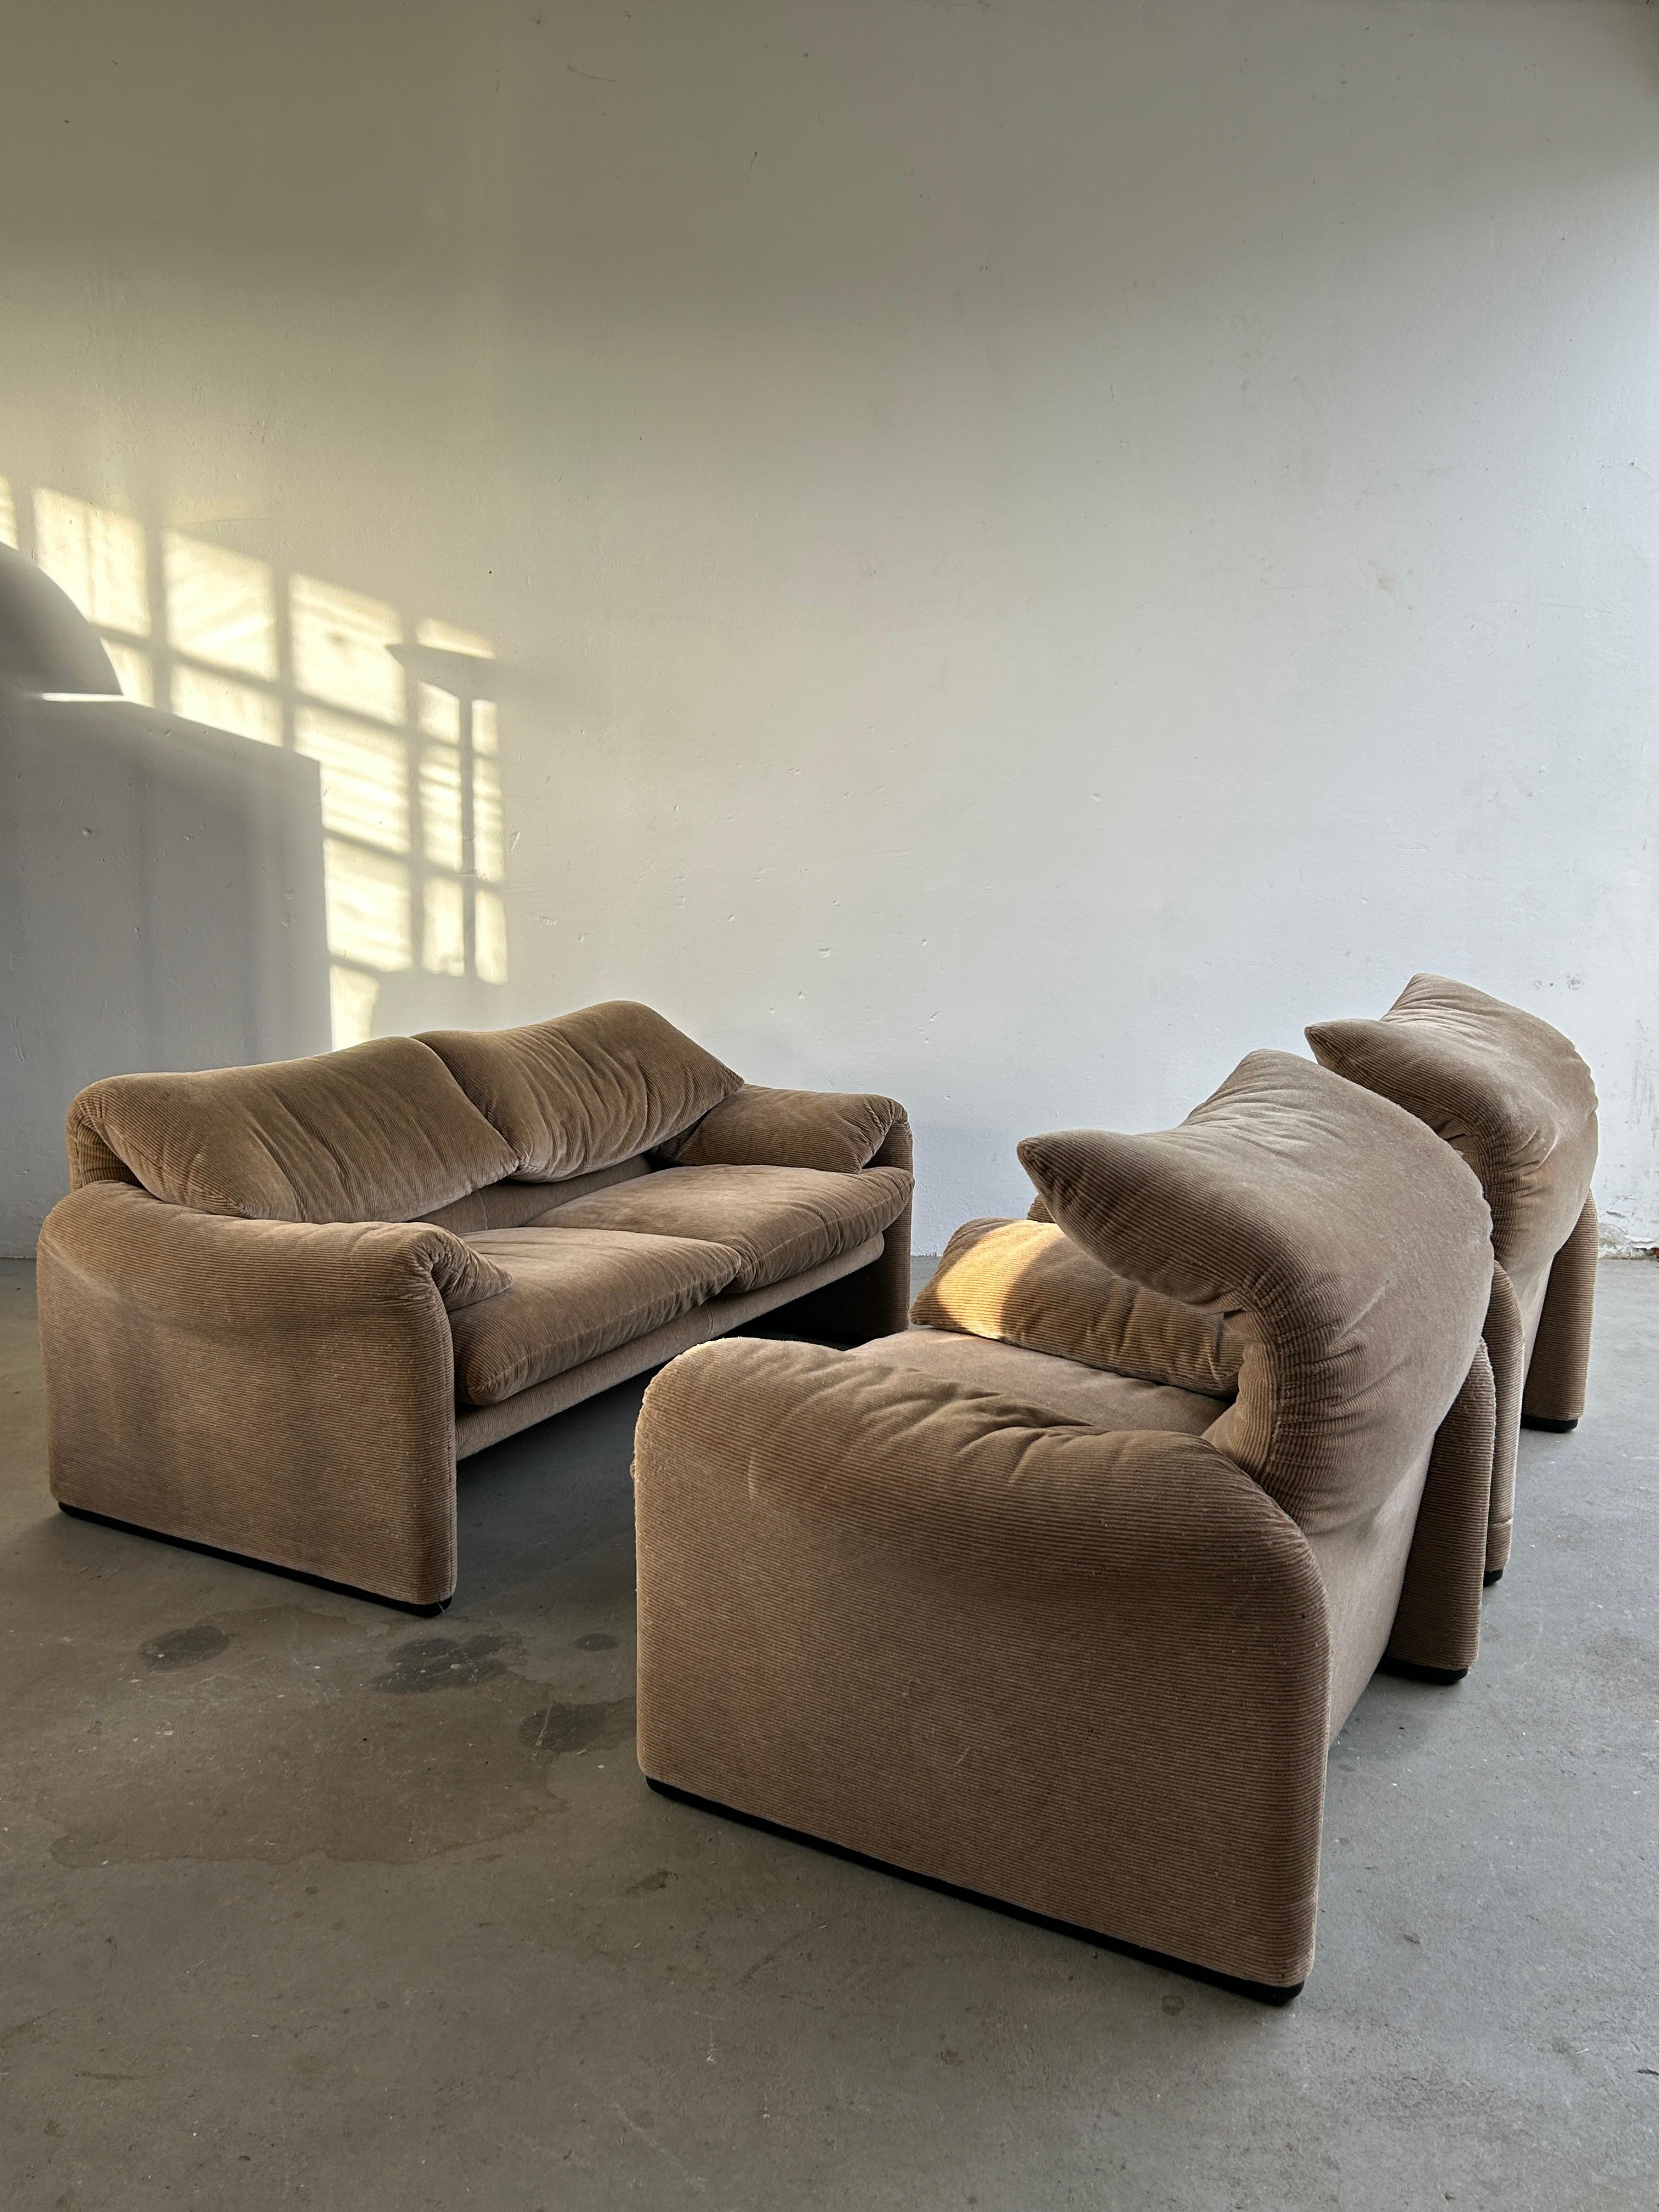 Very exciting and rare, 1970s original iconic 'Maralunga' set of two armchairs and a two-seater sofa, designed by Vico Magistretti for Cassina.
A rare and early production produced during the 1970s in Italy, in beige striped fabric.
Both the